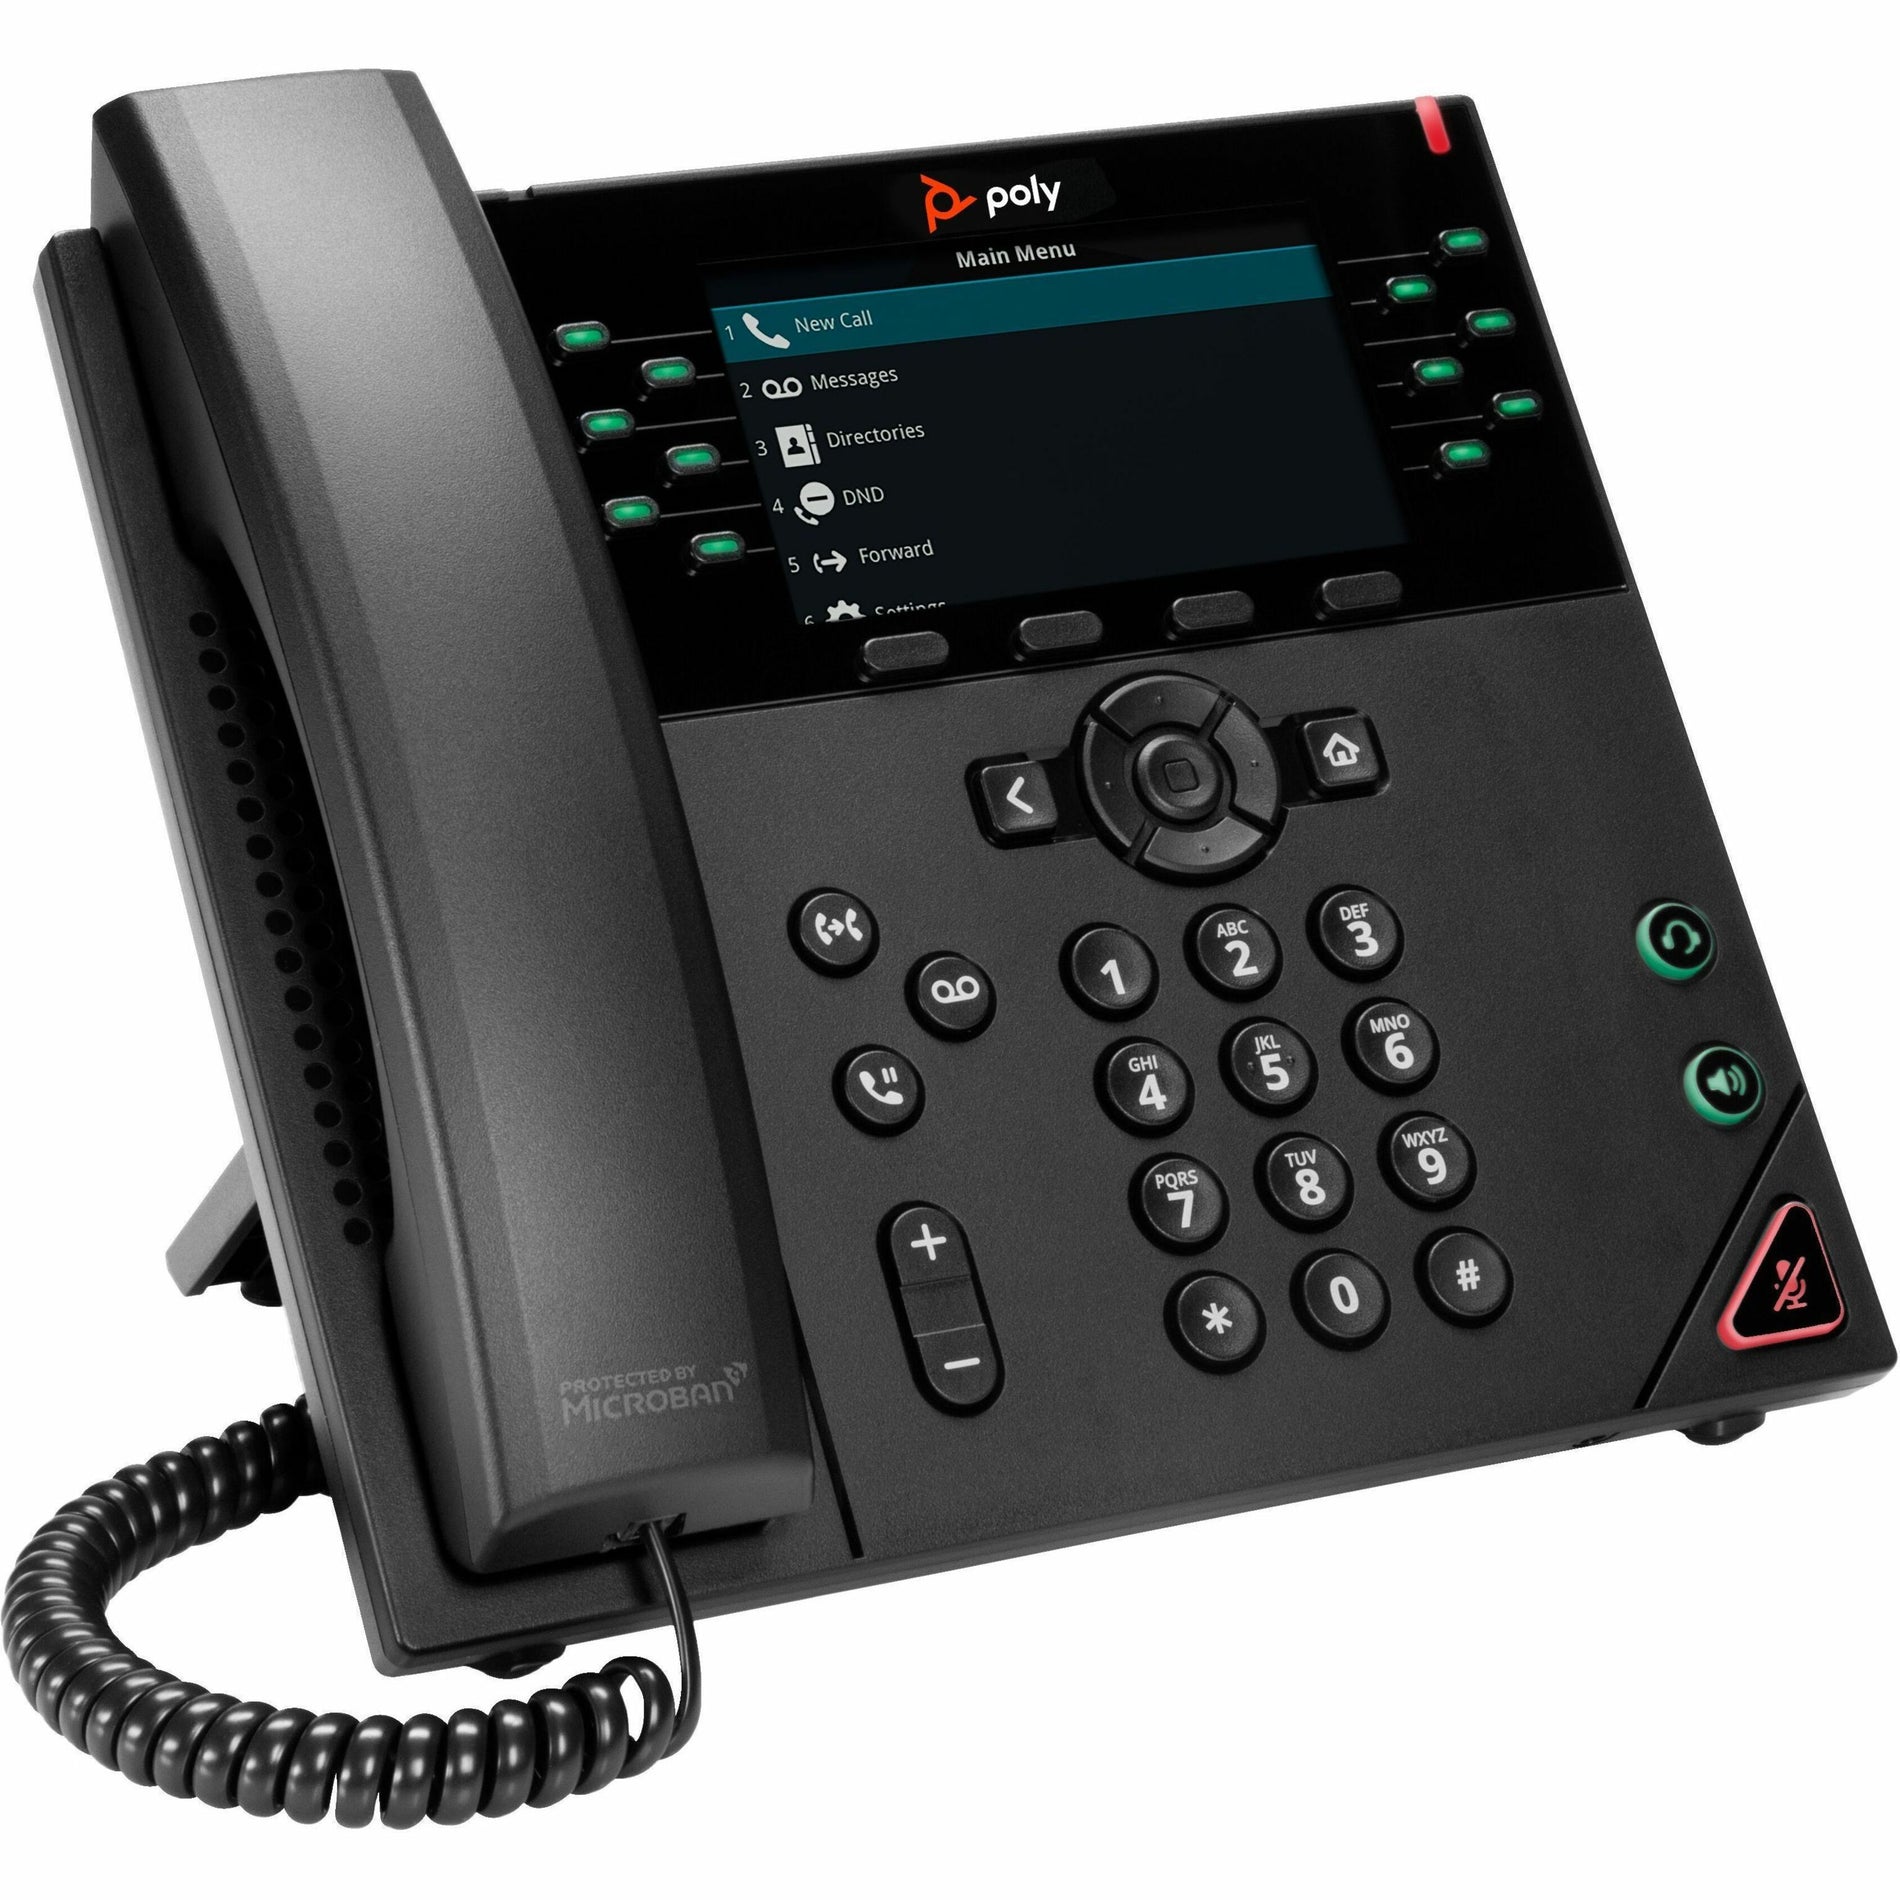 Poly VVX 450 12-Line IP Phone and PoE-Enabled with Power Supply, Energy Star, 1 Year Warranty